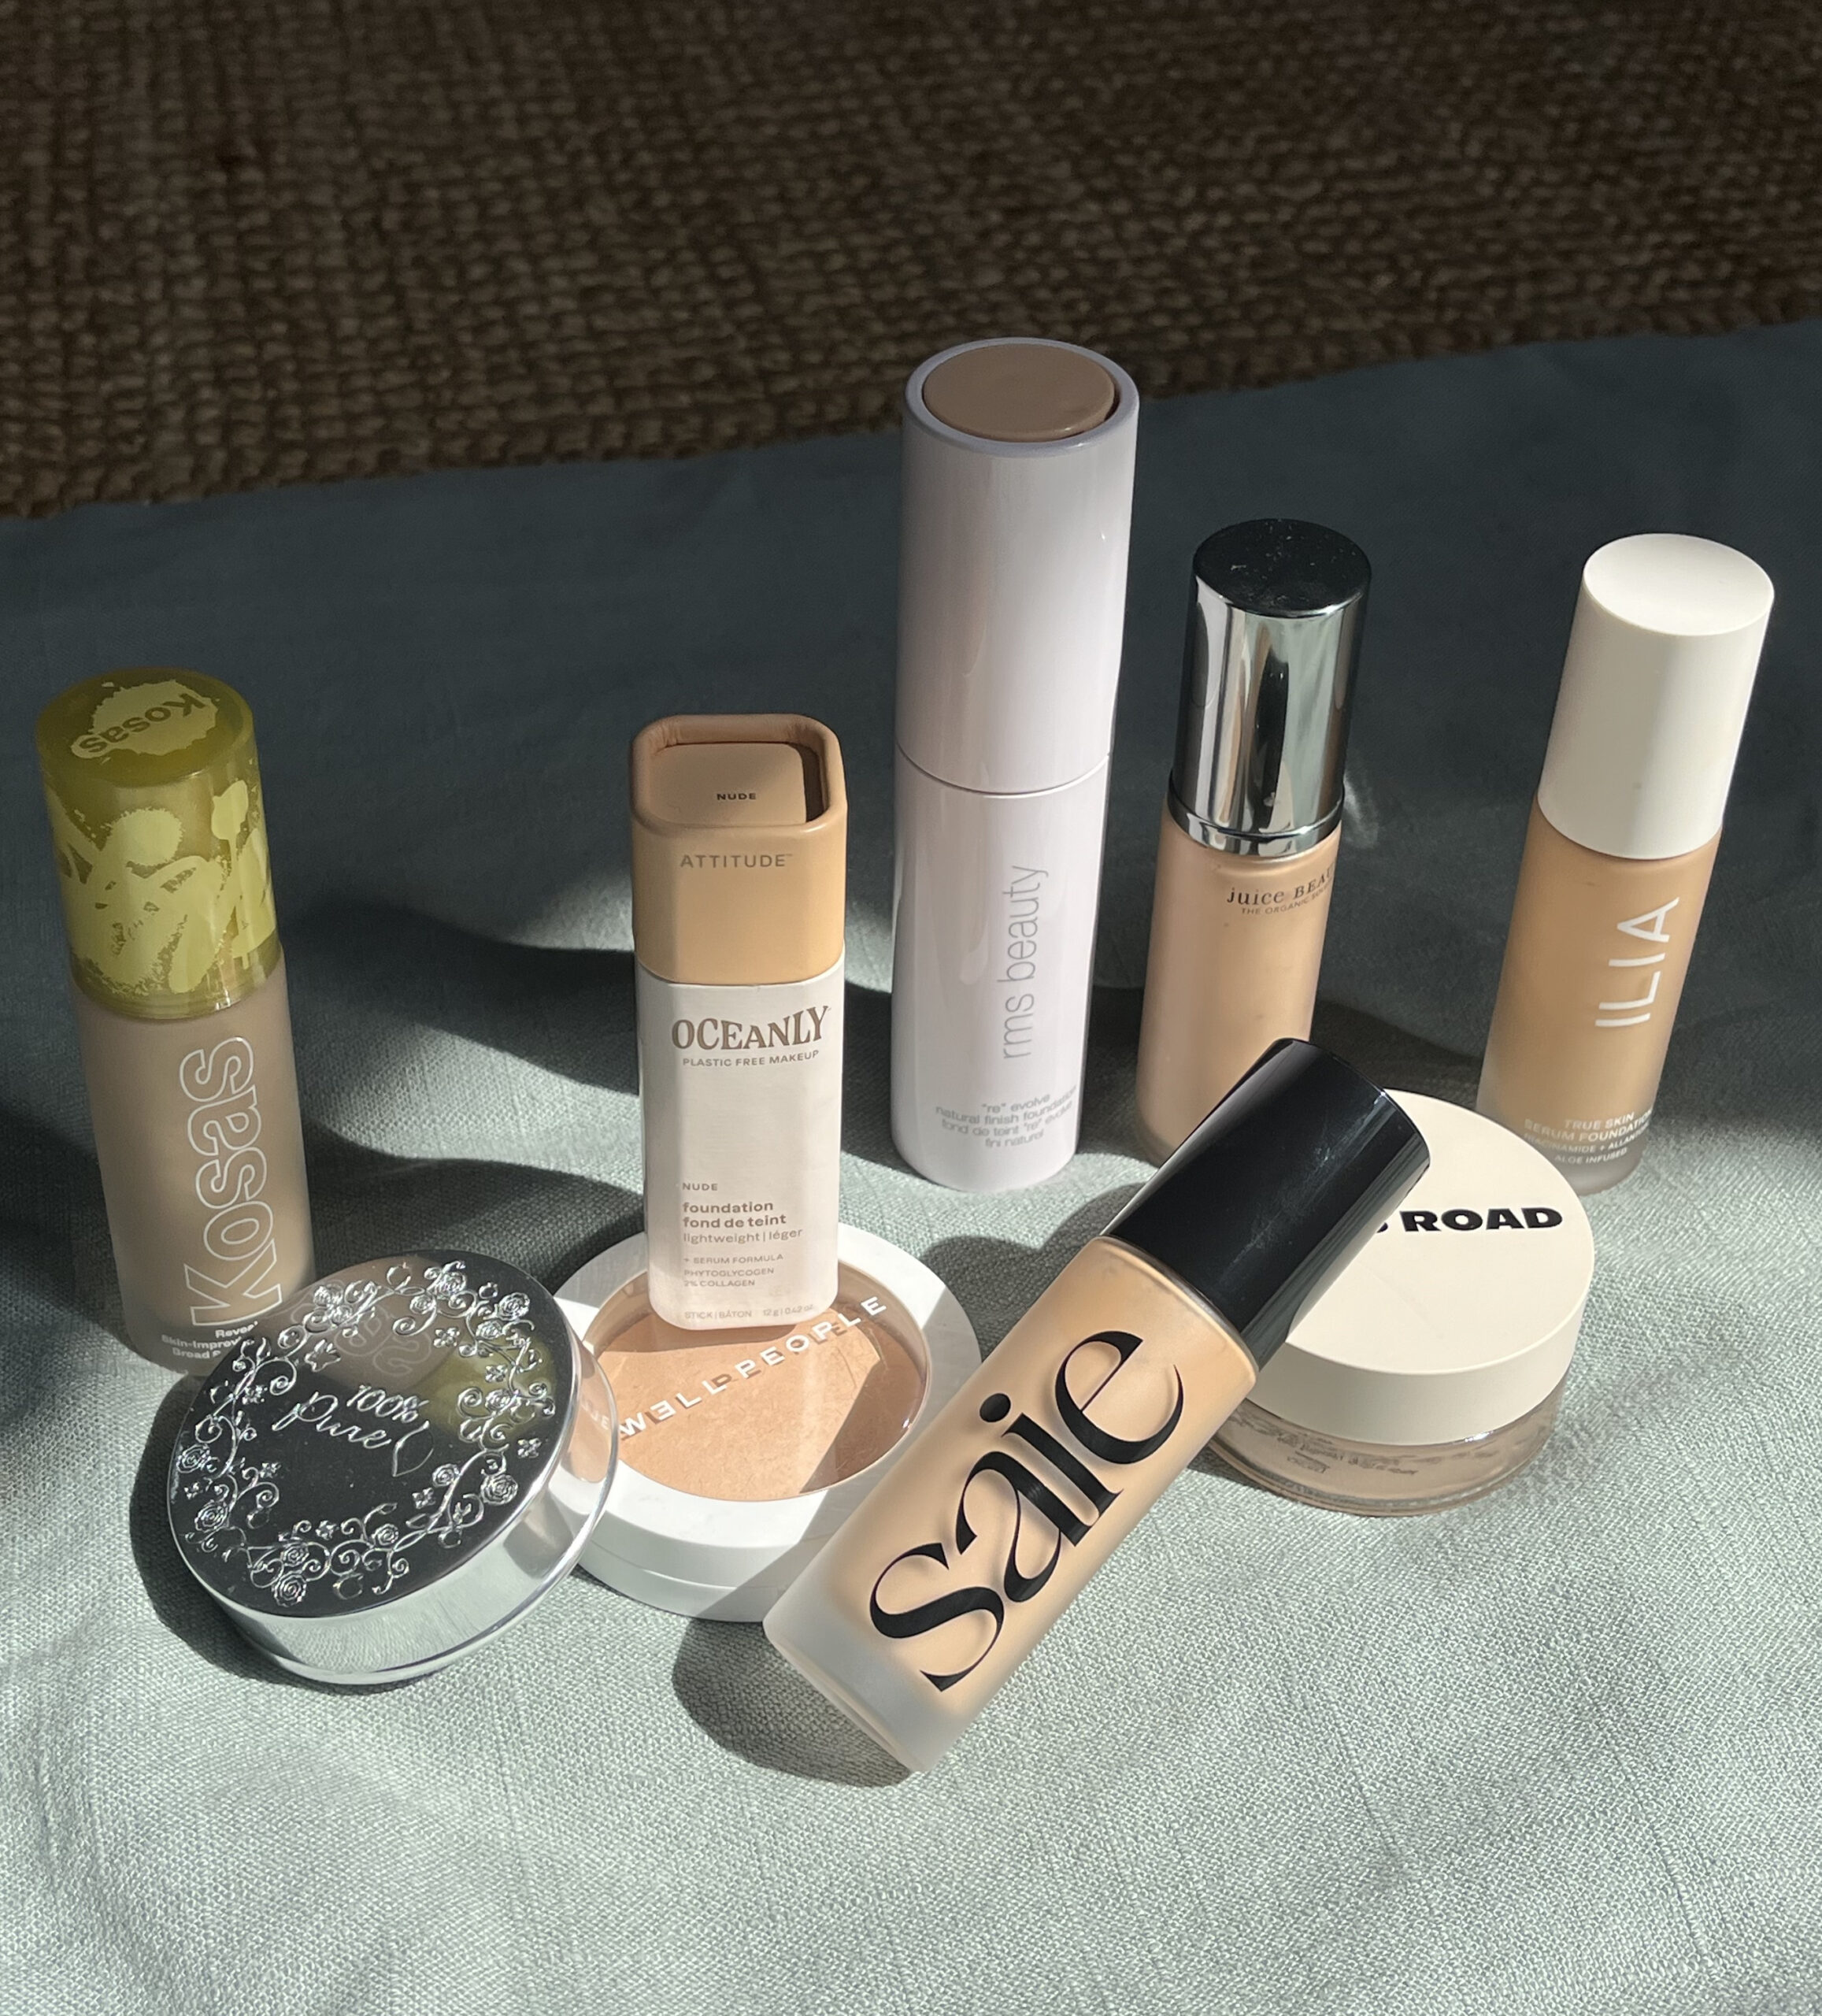 Various brands of makeup products, including foundations and concealers, arranged on a sunlit surface.